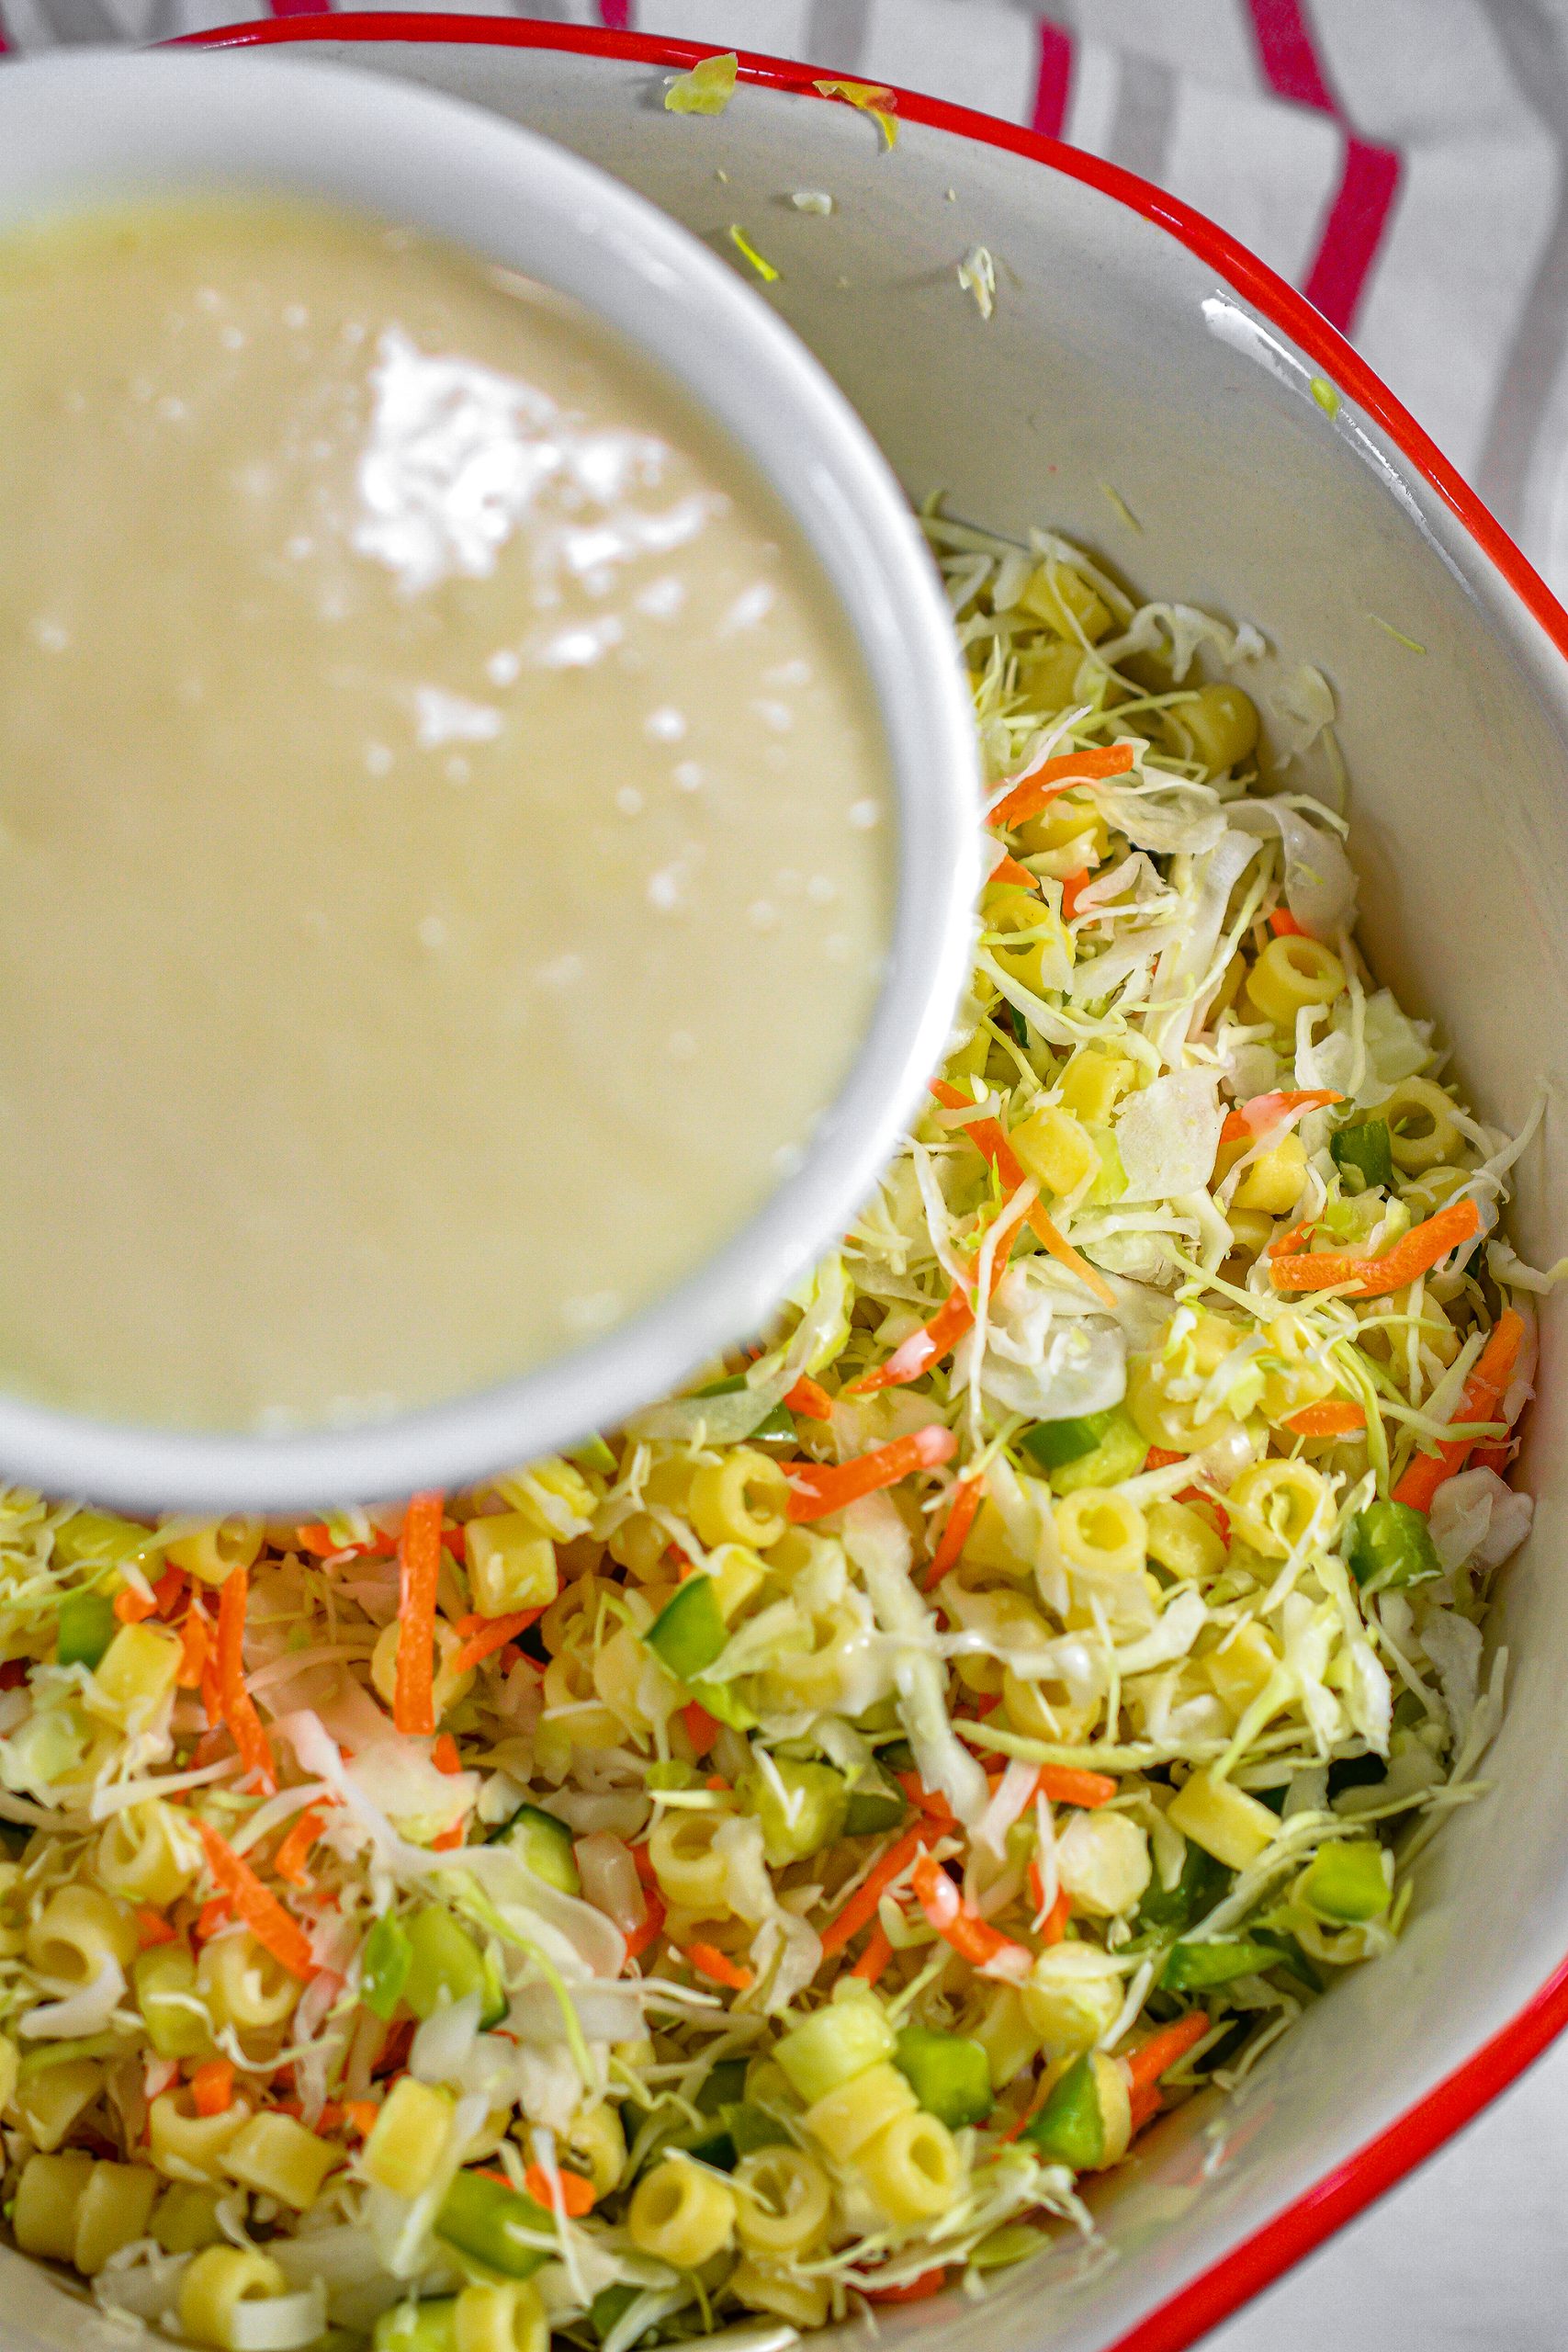 Pour the dressing mixture over the slaw, and toss to combine well.